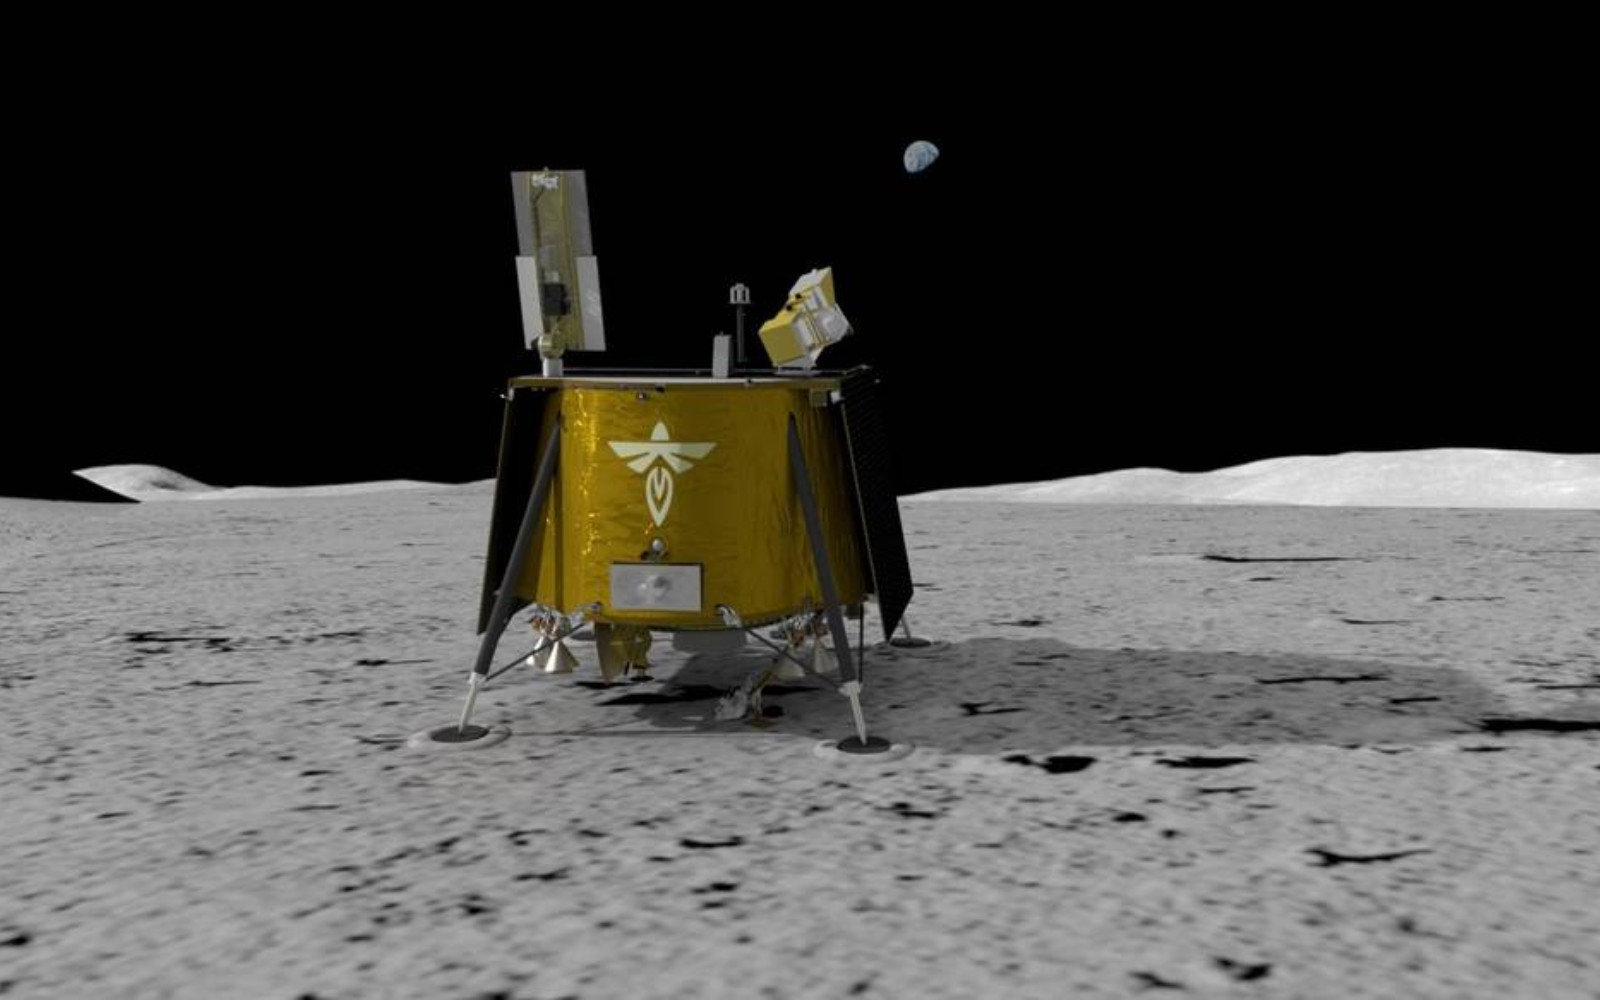 Firefly Goes to the Moon: NASA Sends Firefly Aerospace Lander to the Moon in 2023